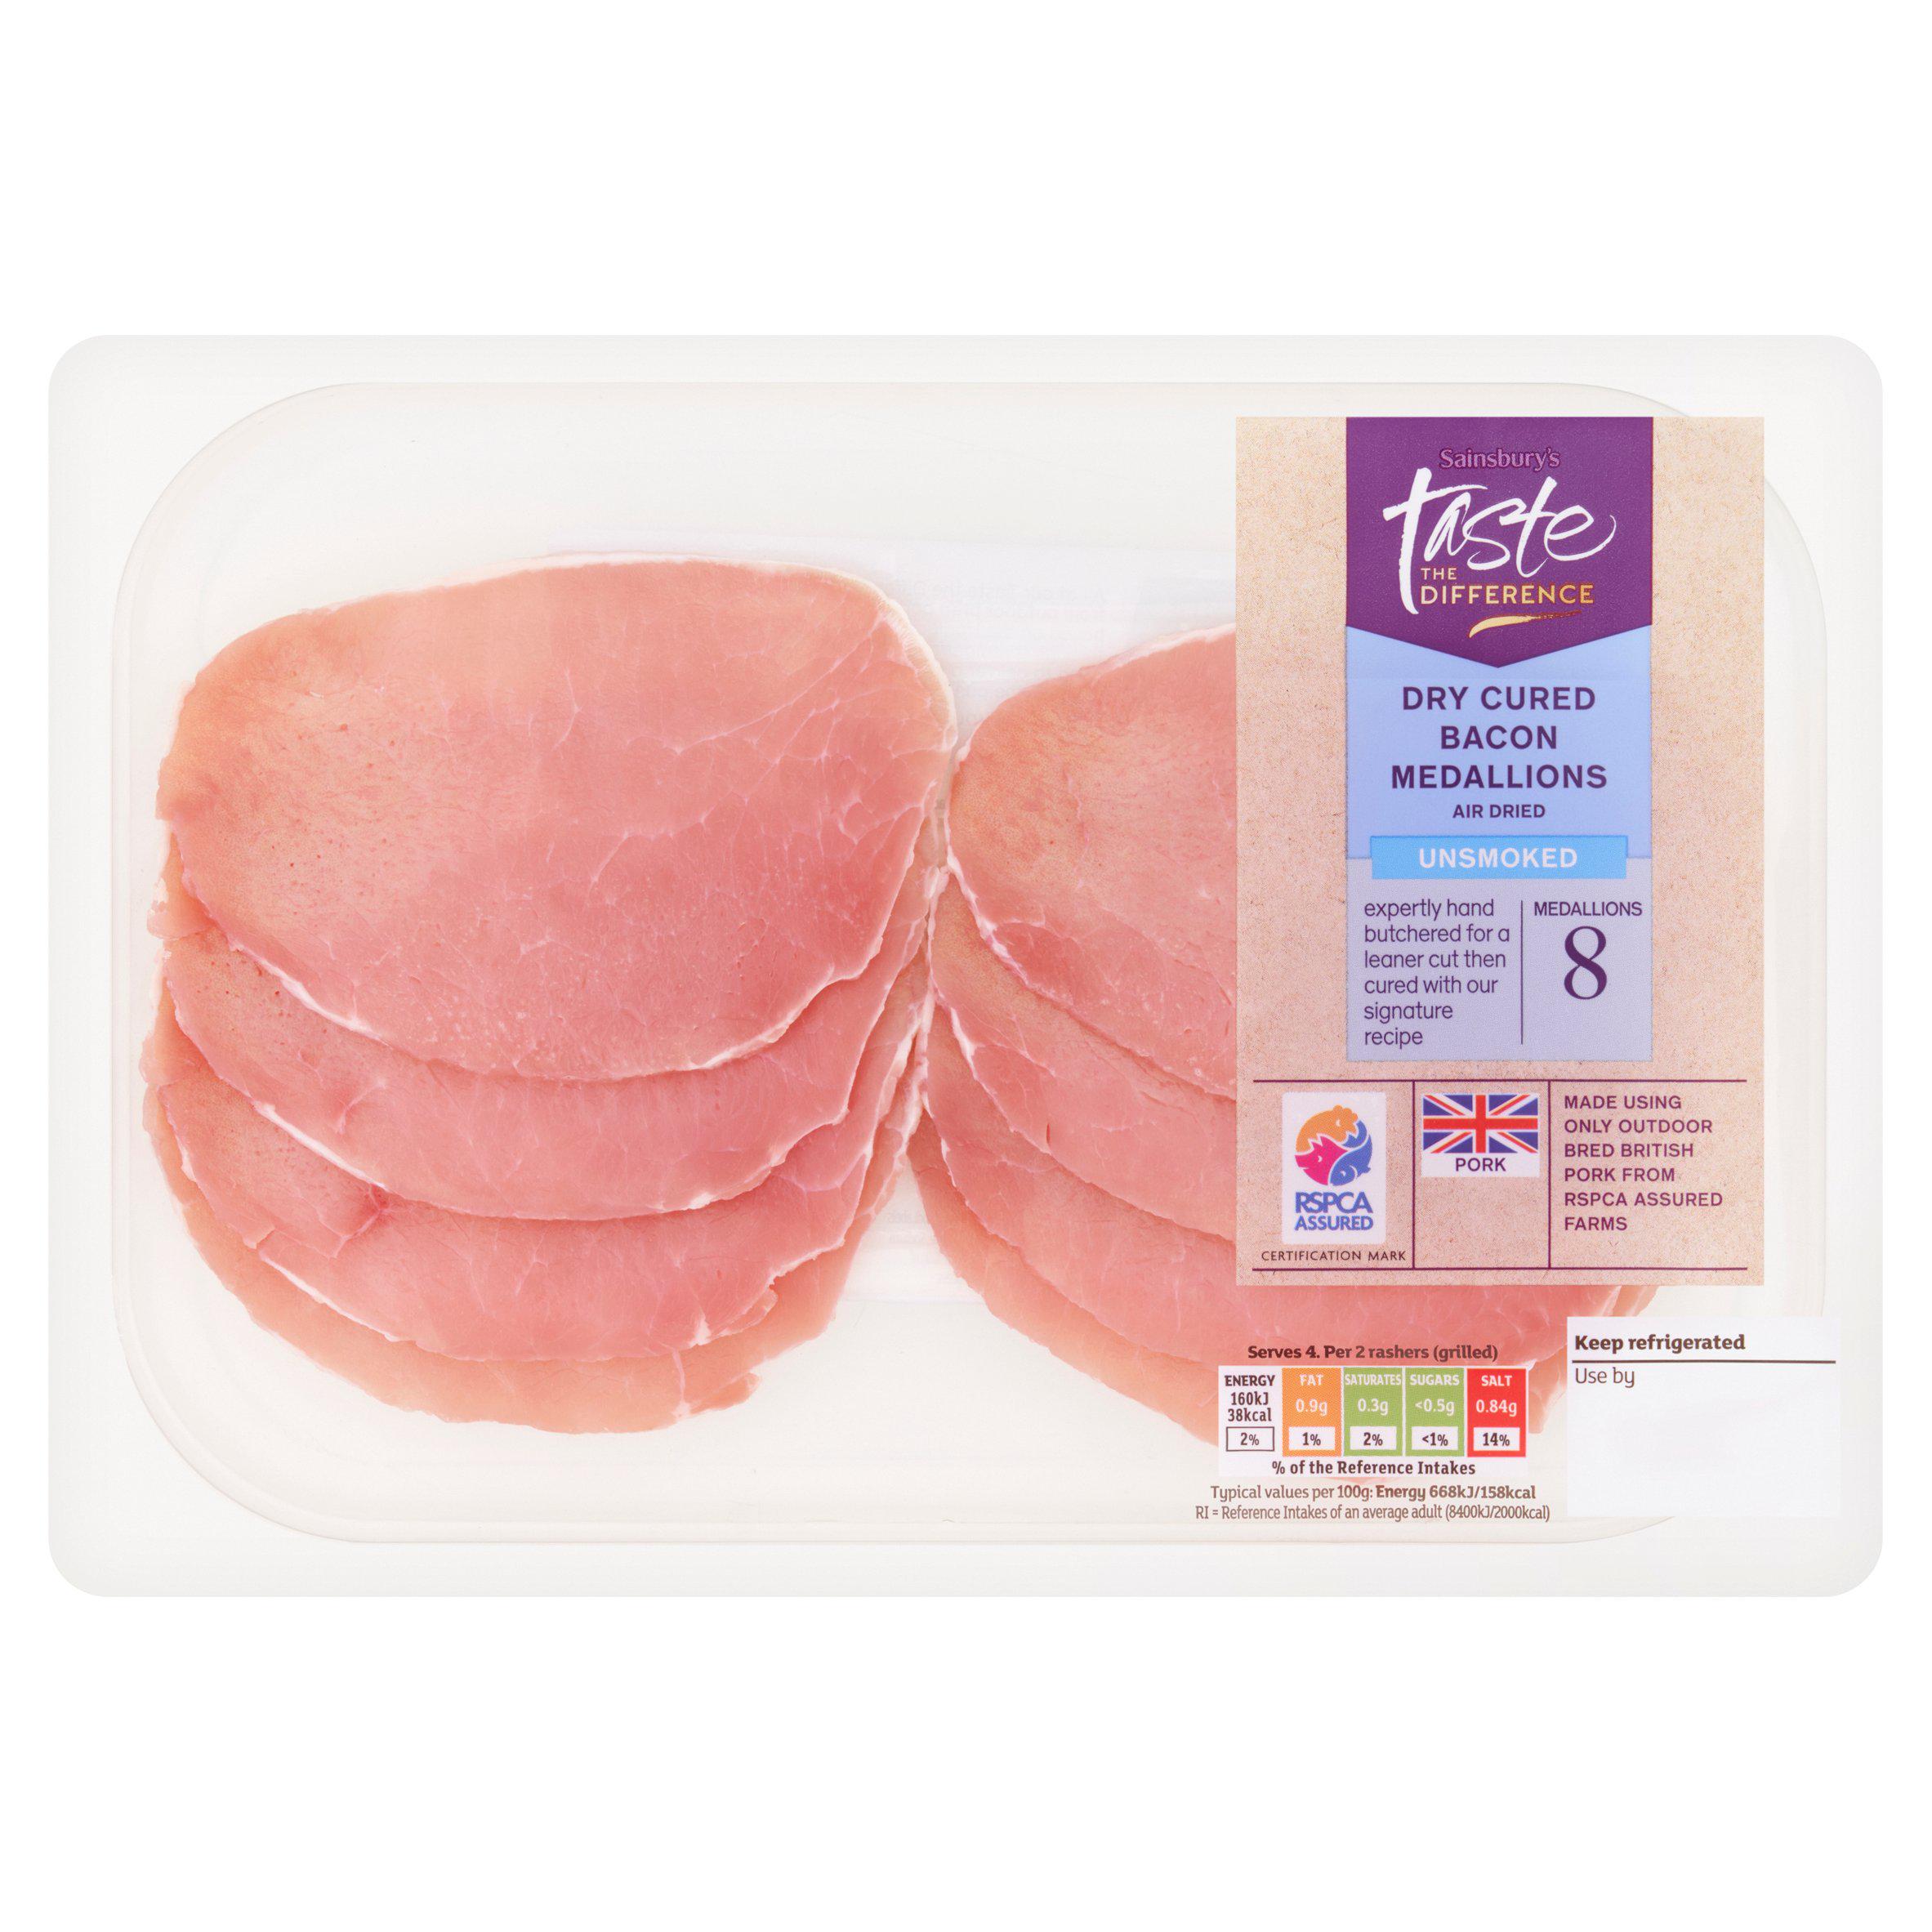 Sainsbury's Unsmoked Air Dried Bacon Medallions, Taste the Difference x8 160g